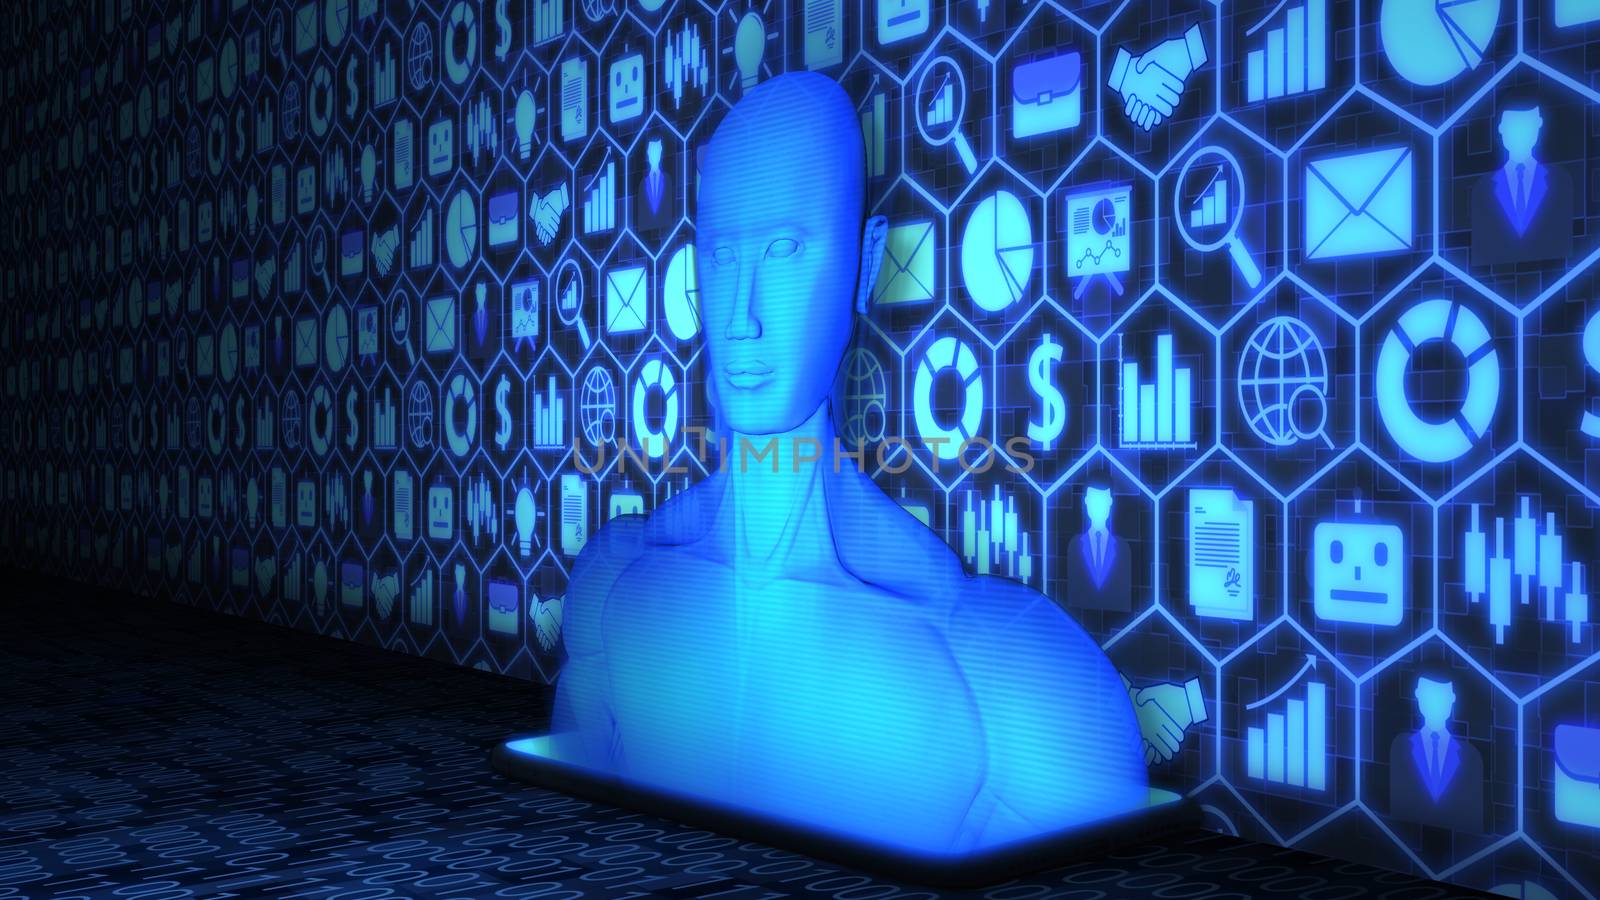 8K 3D Rendered AI/Human Hologram projected from Smartphone on the floor with Business and Technology icon set Background and Random Binary Code on the floor in blue color by ariya23156